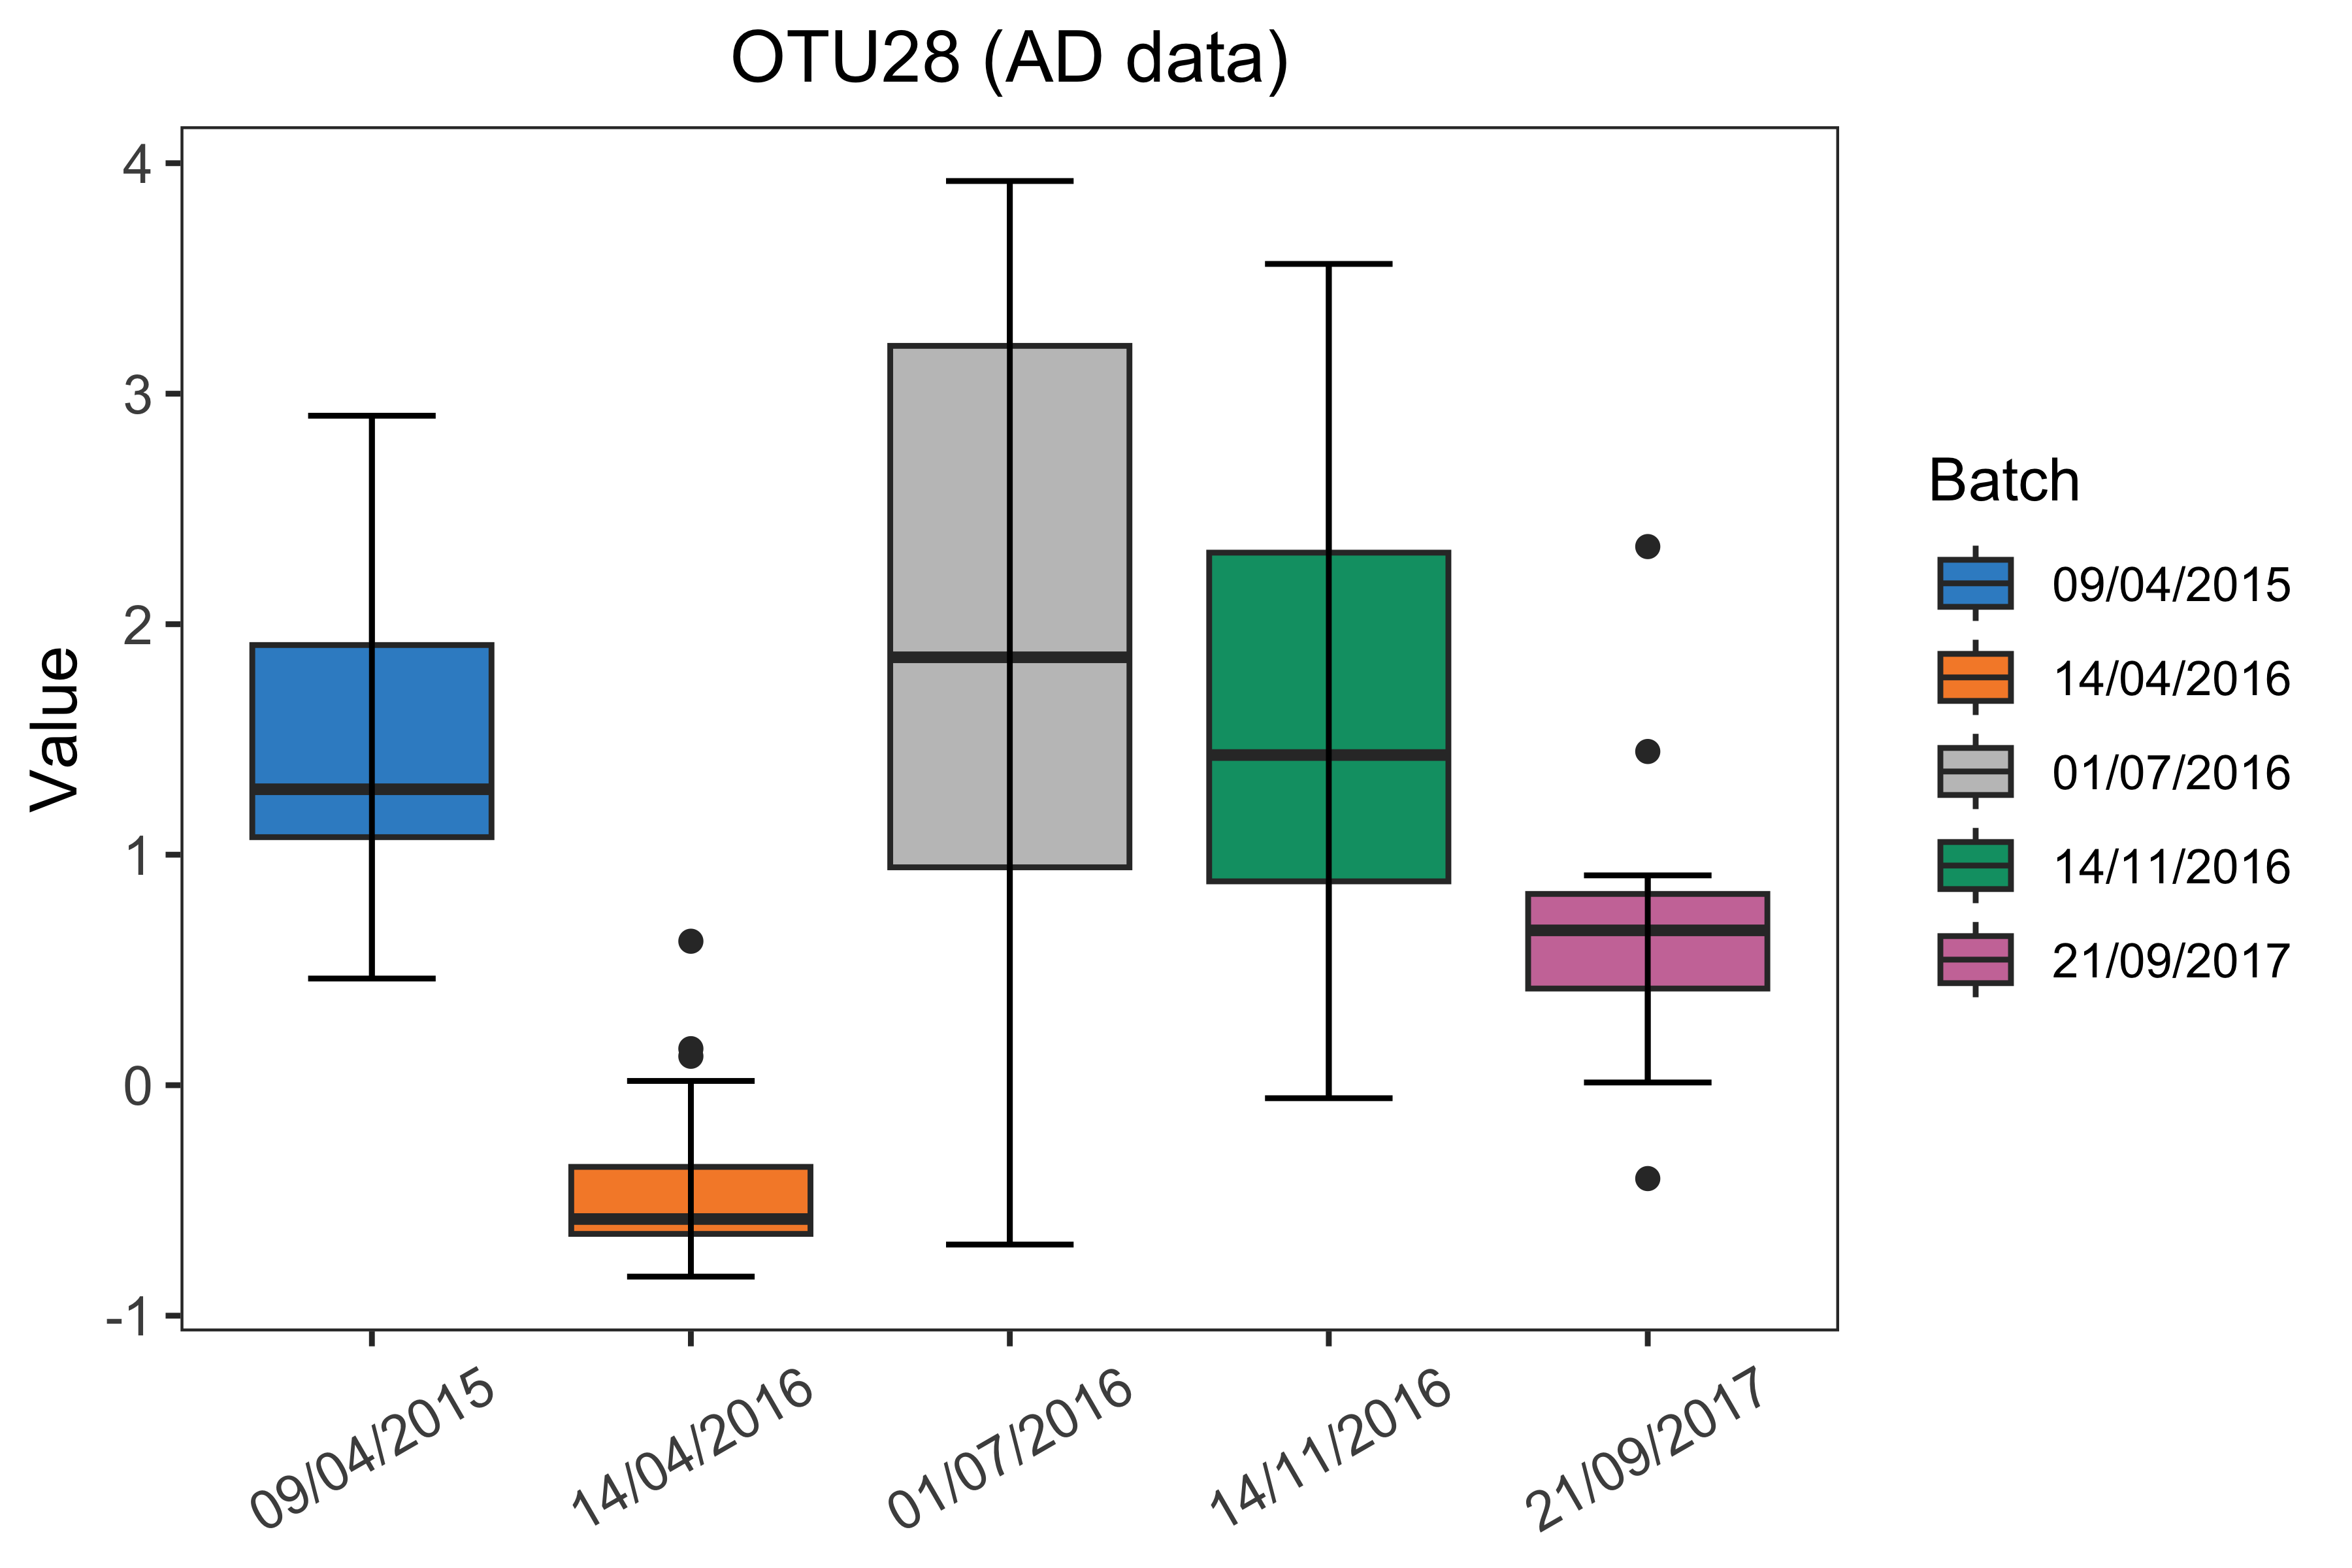 Boxplots of sample values in "OTU28" before batch effect correction in the AD data.